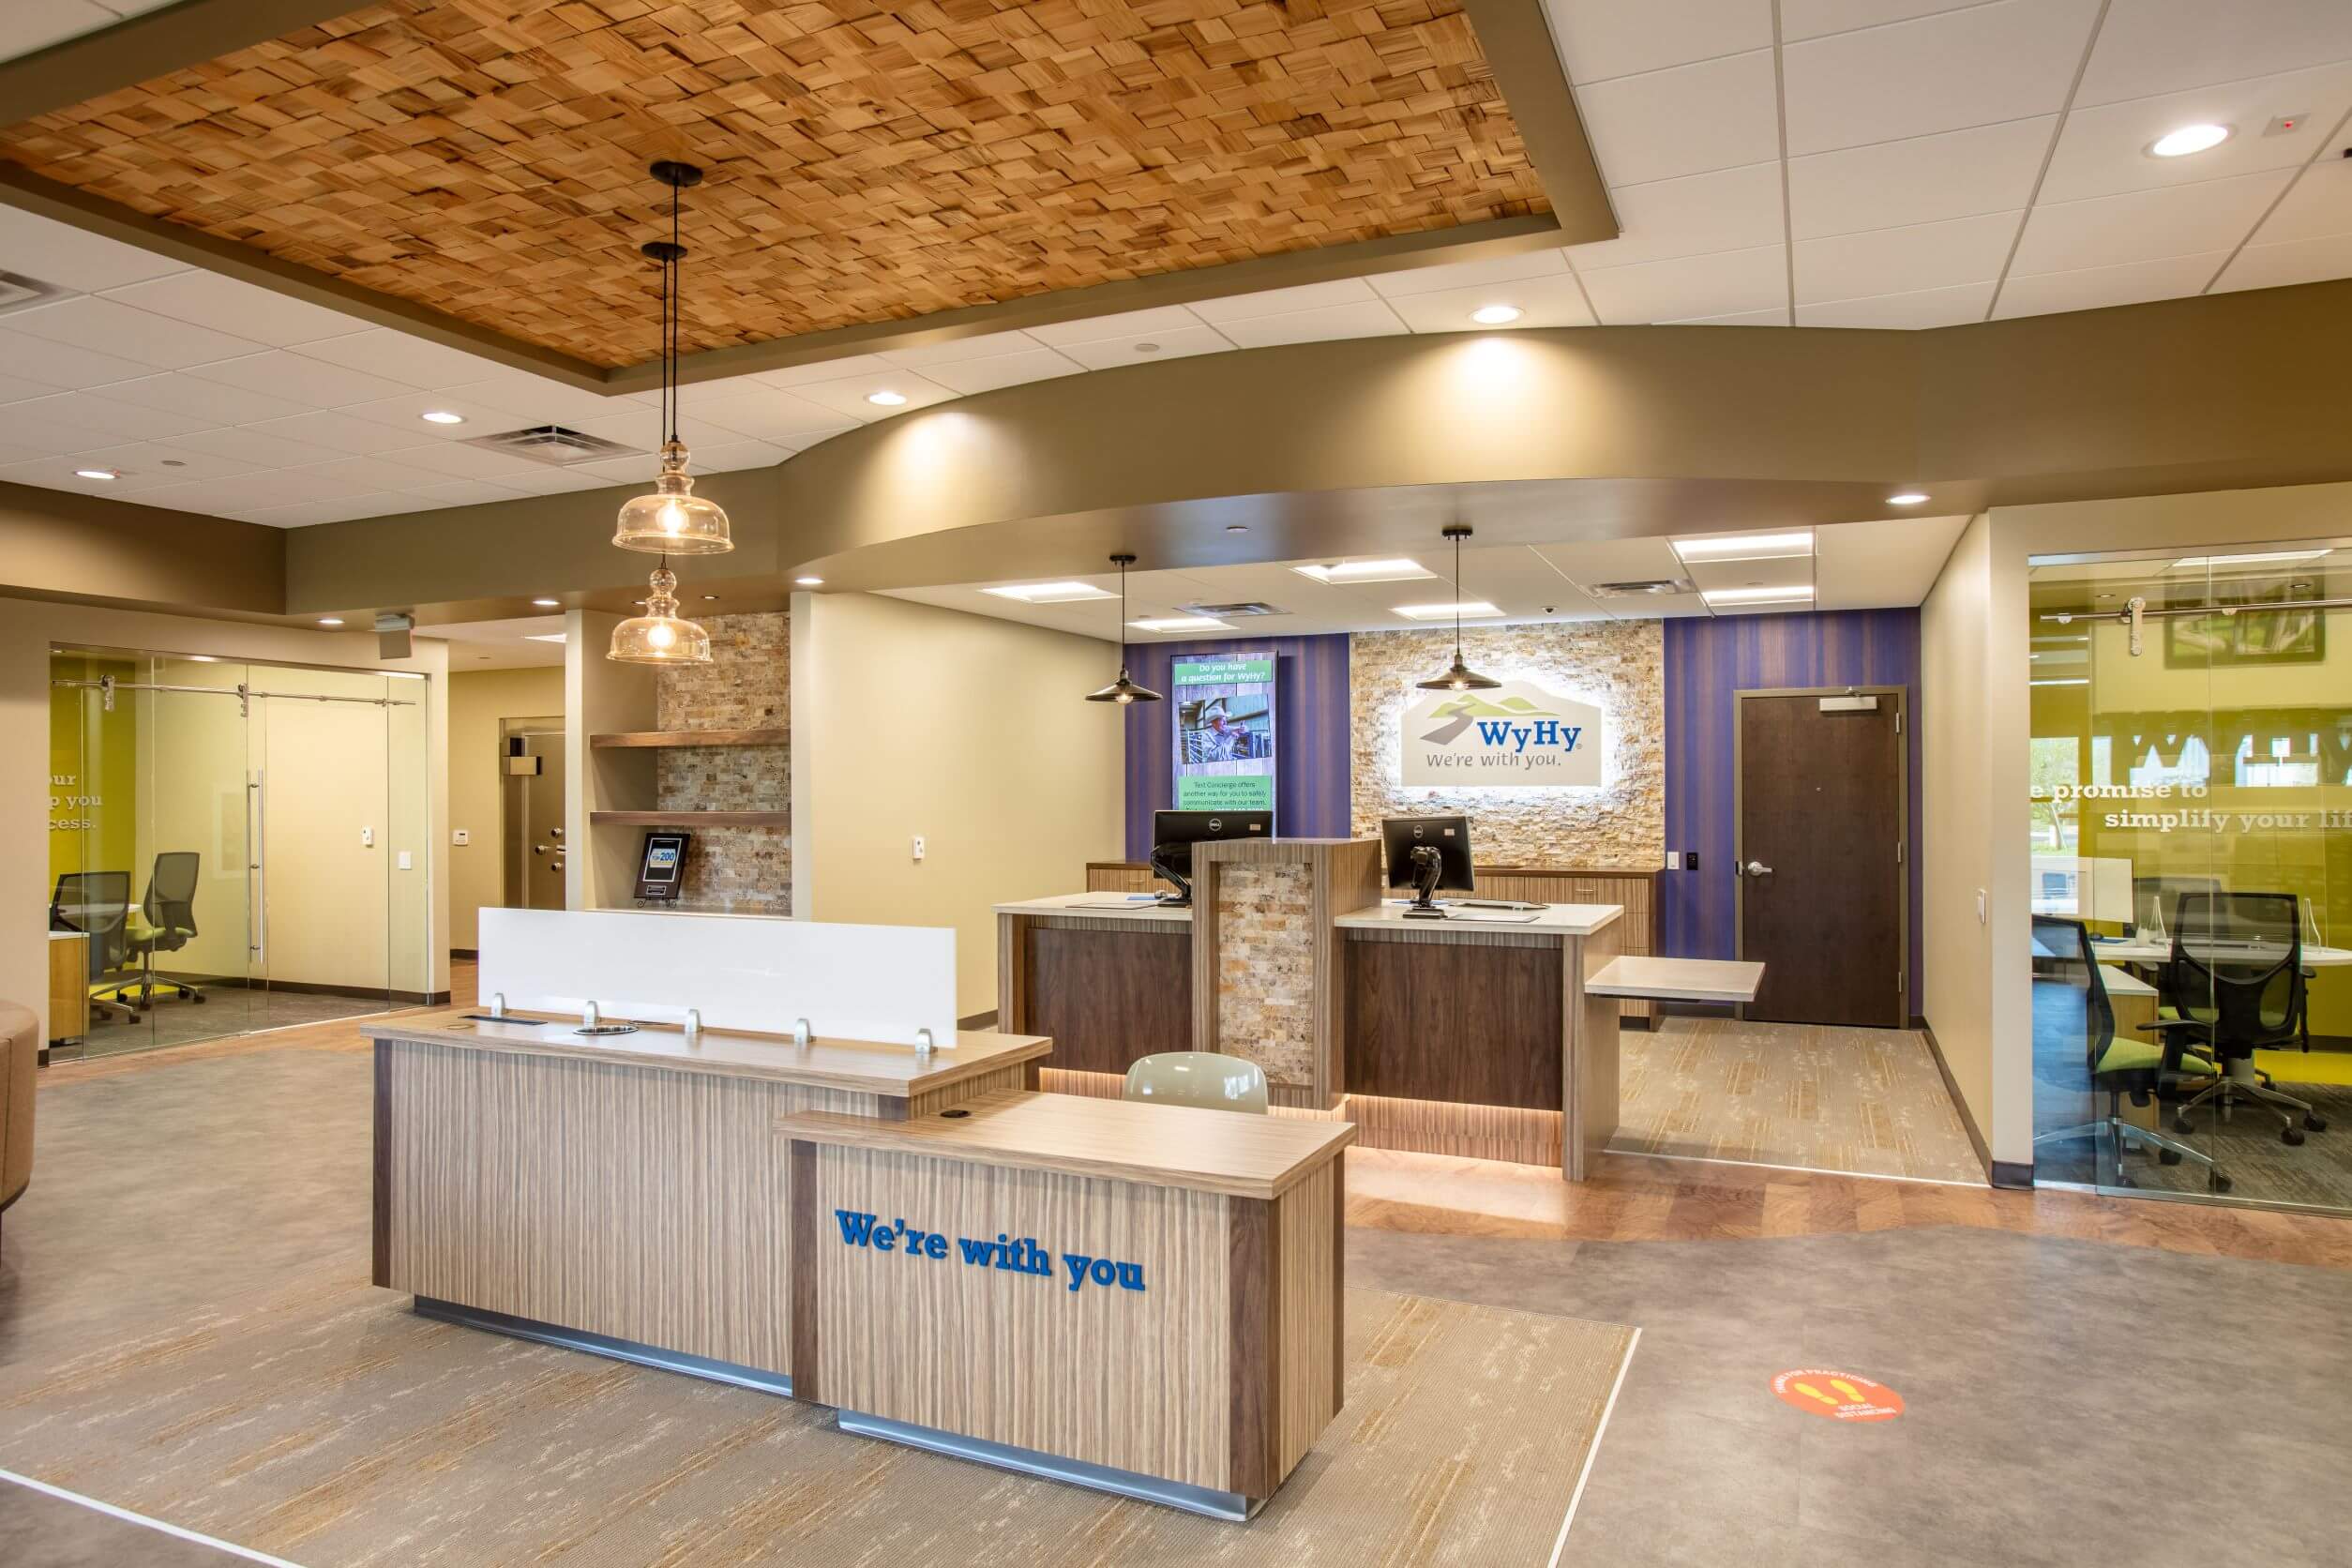 Credit union branch transformation in Wyoming